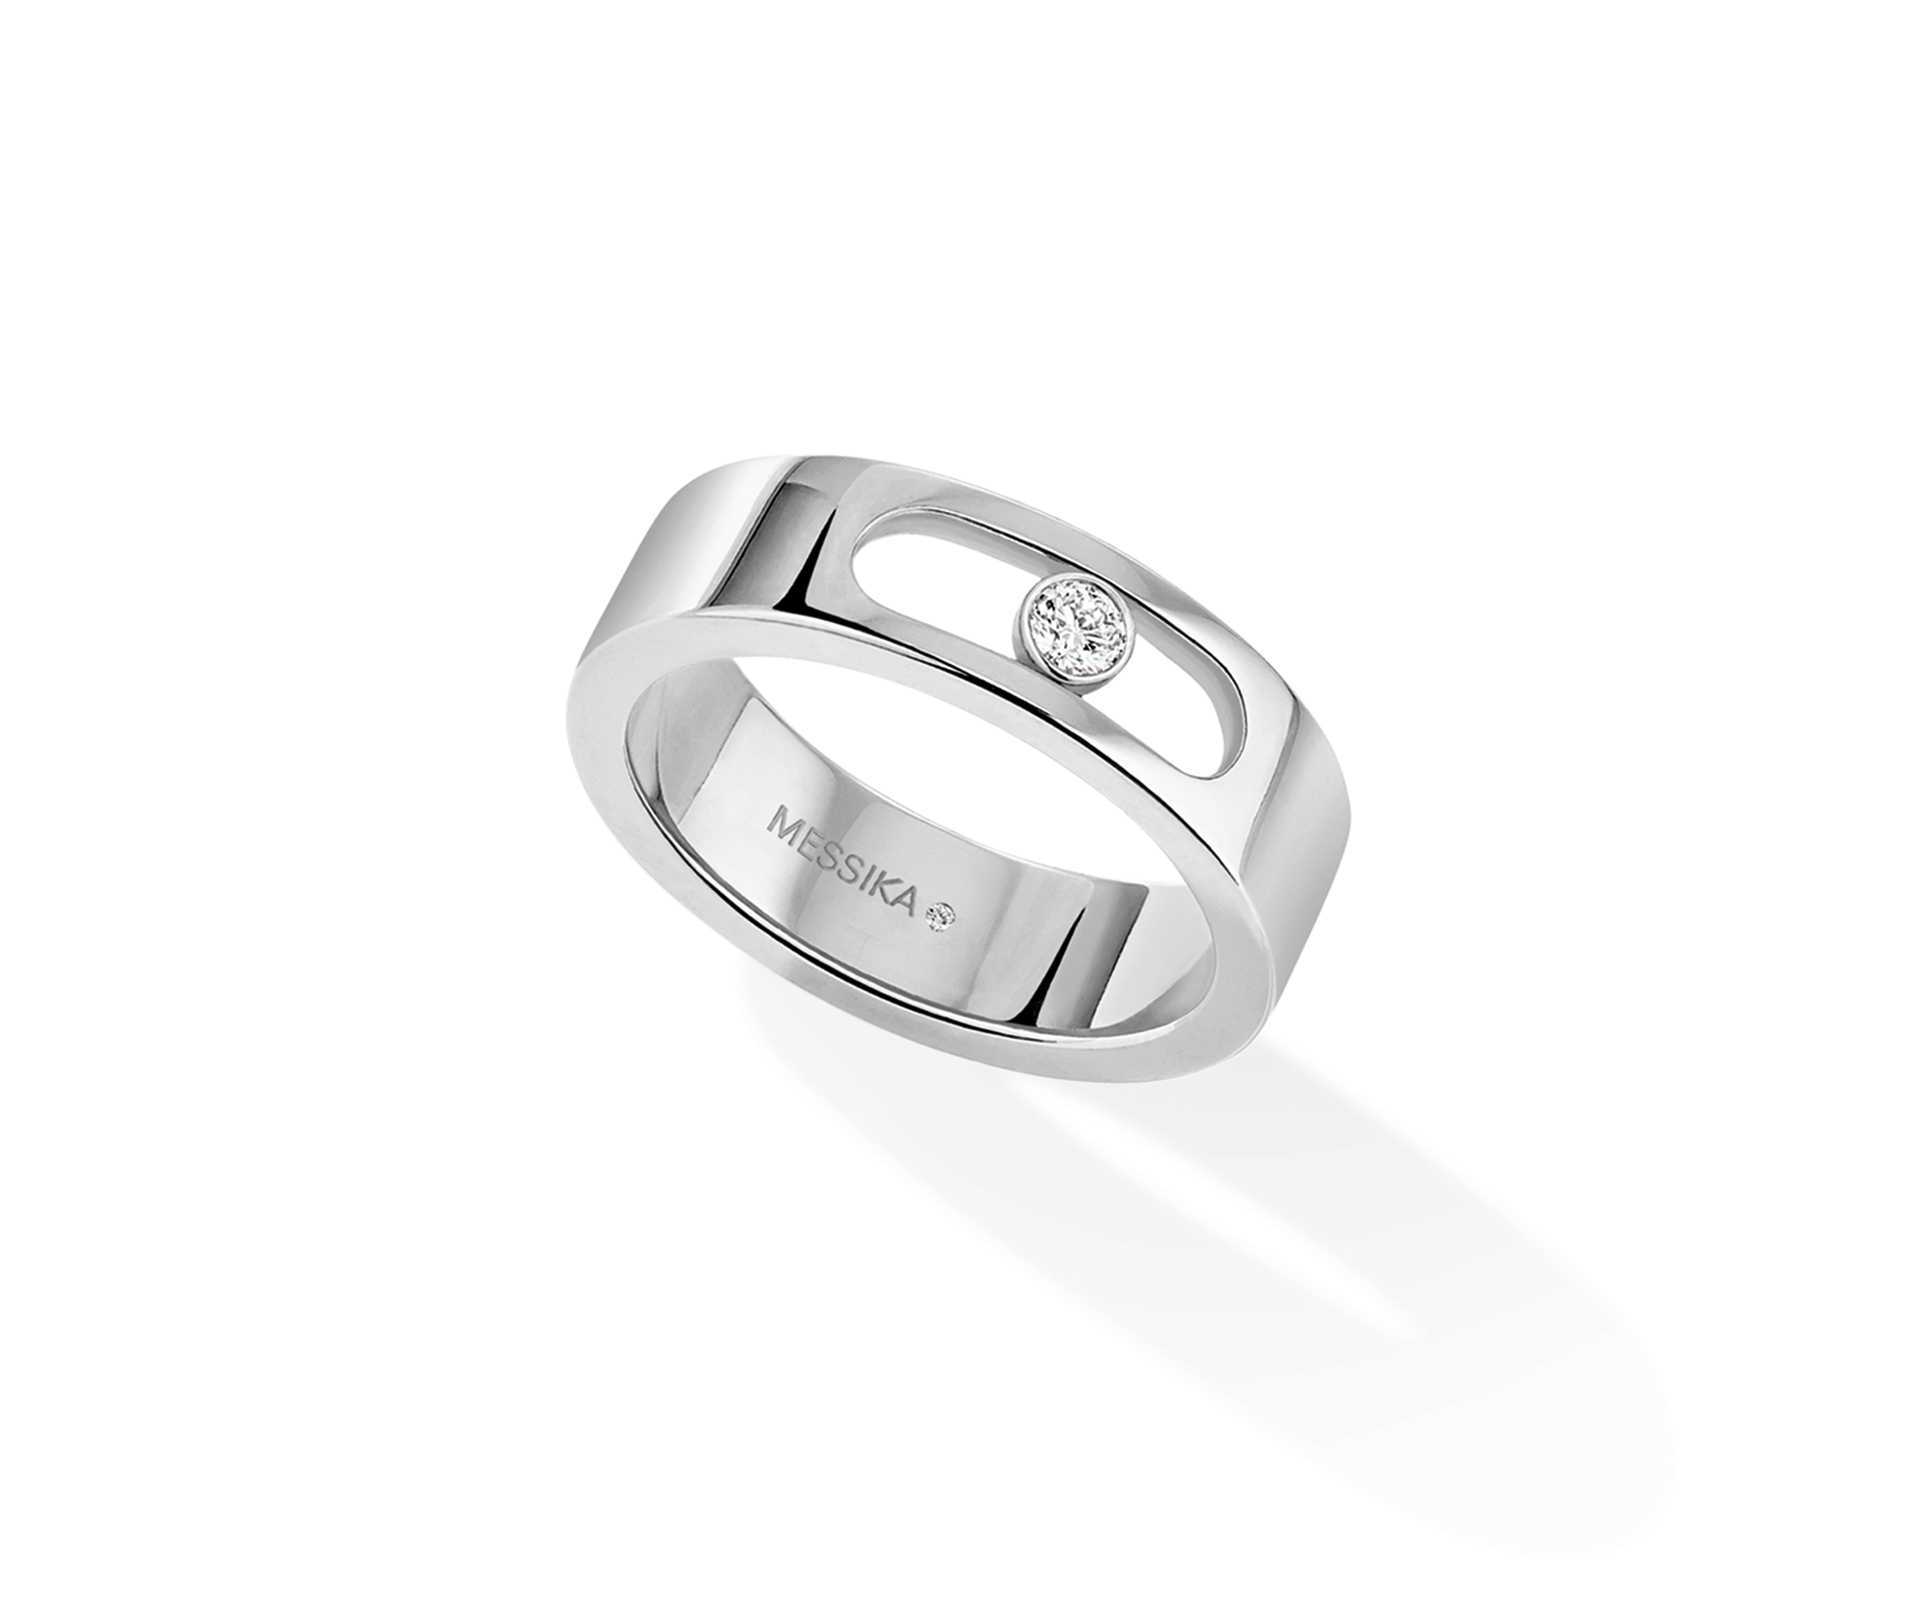 Messika Move Jaillerie Wedding Ring